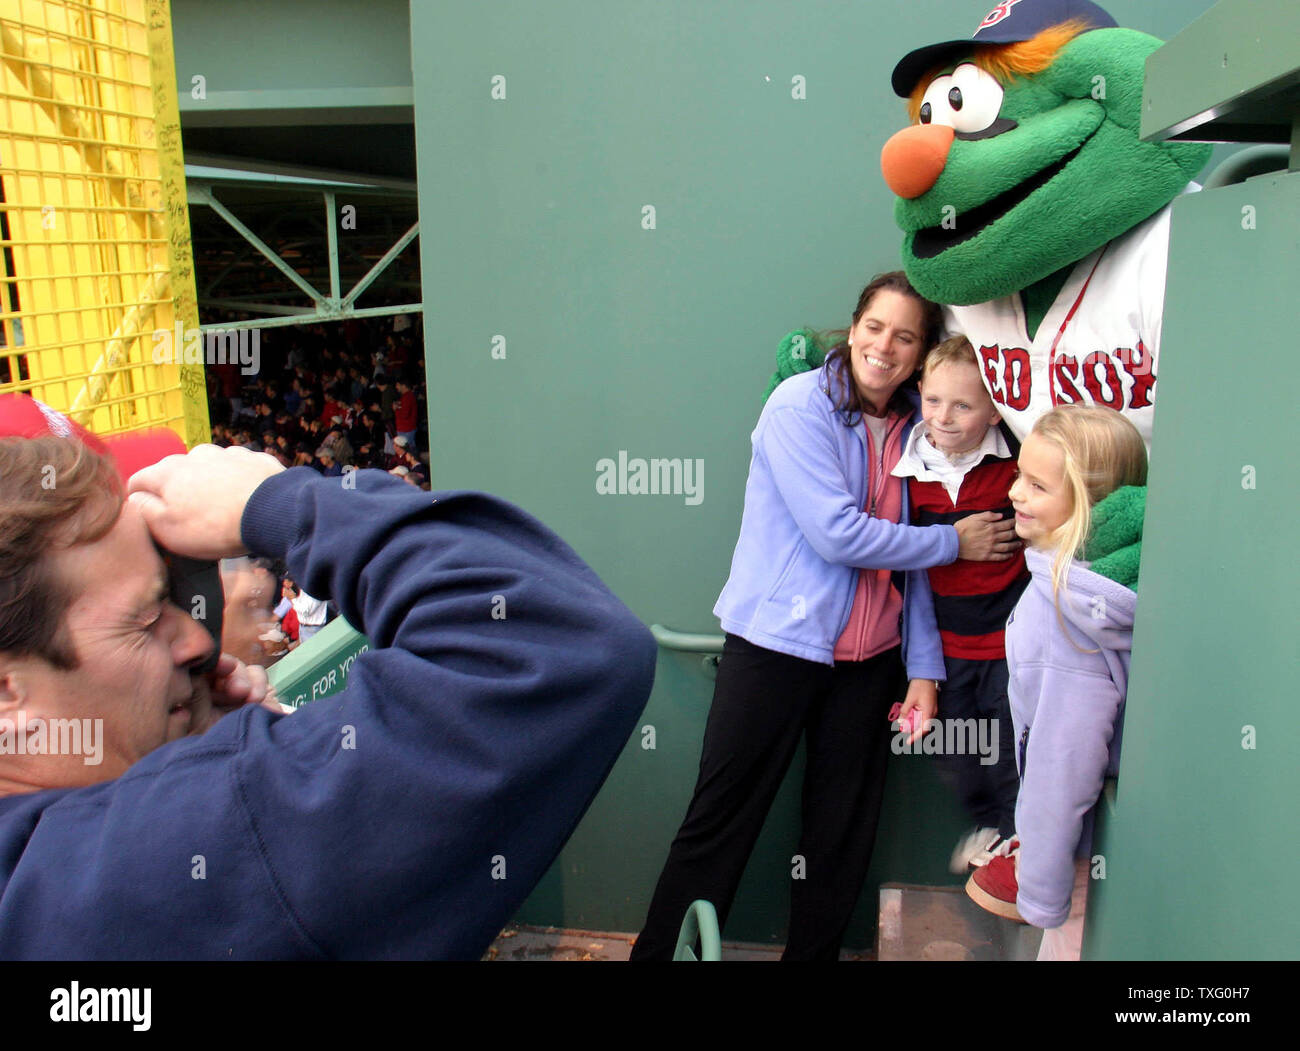 A day at the office with Wally the Green Monster 